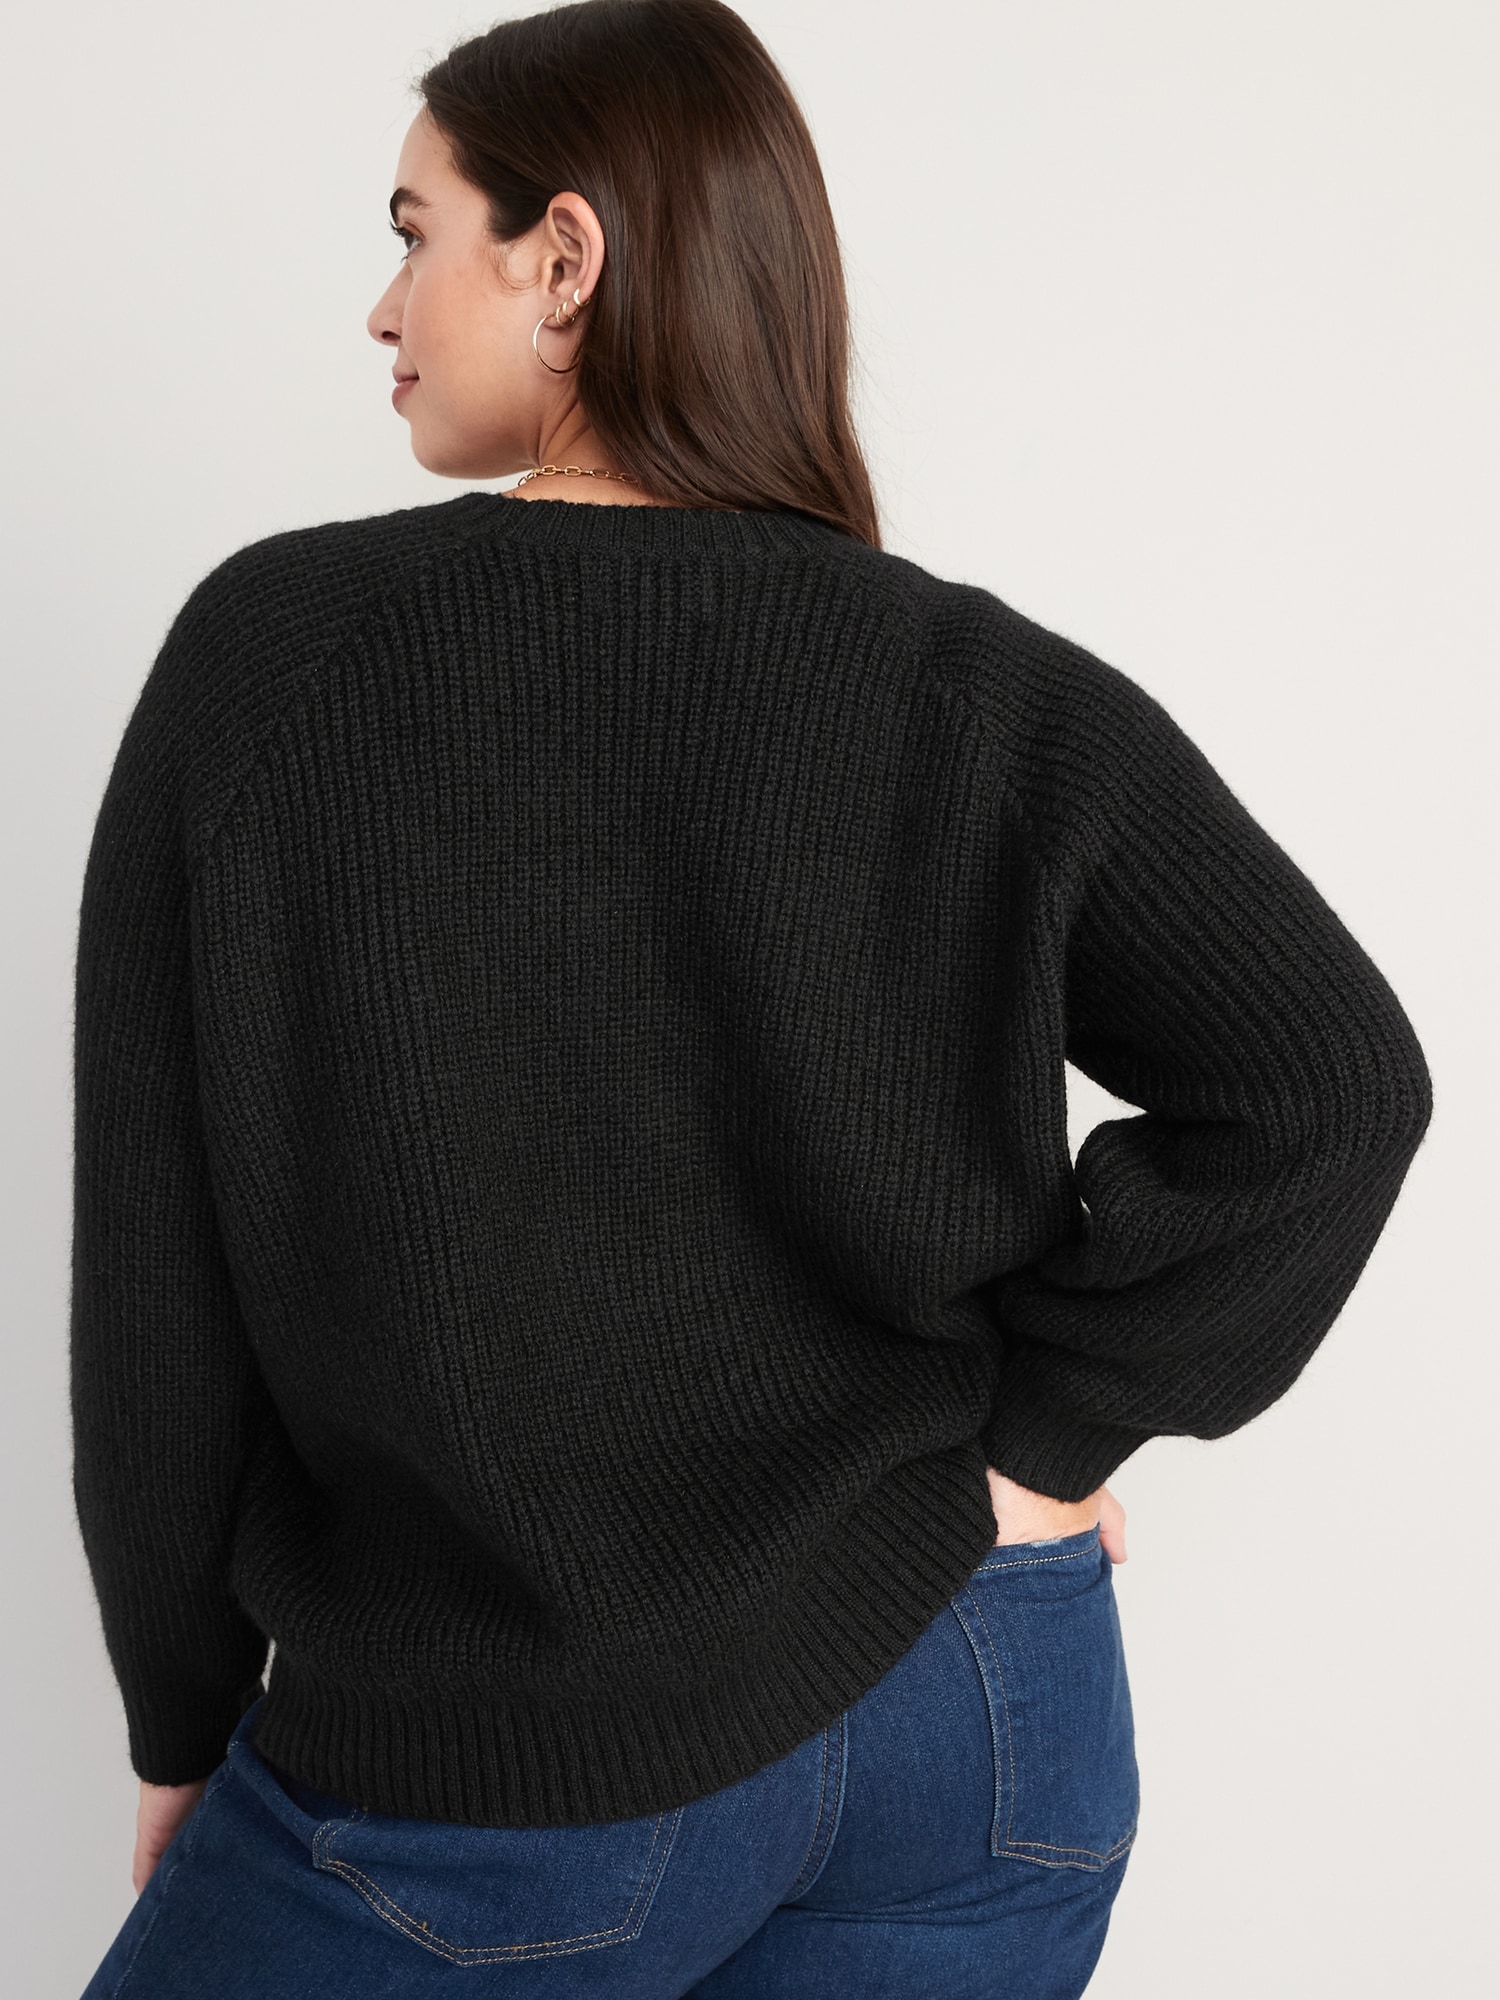 Heathered Cozy Shaker-Stitch Pullover Sweater for Women